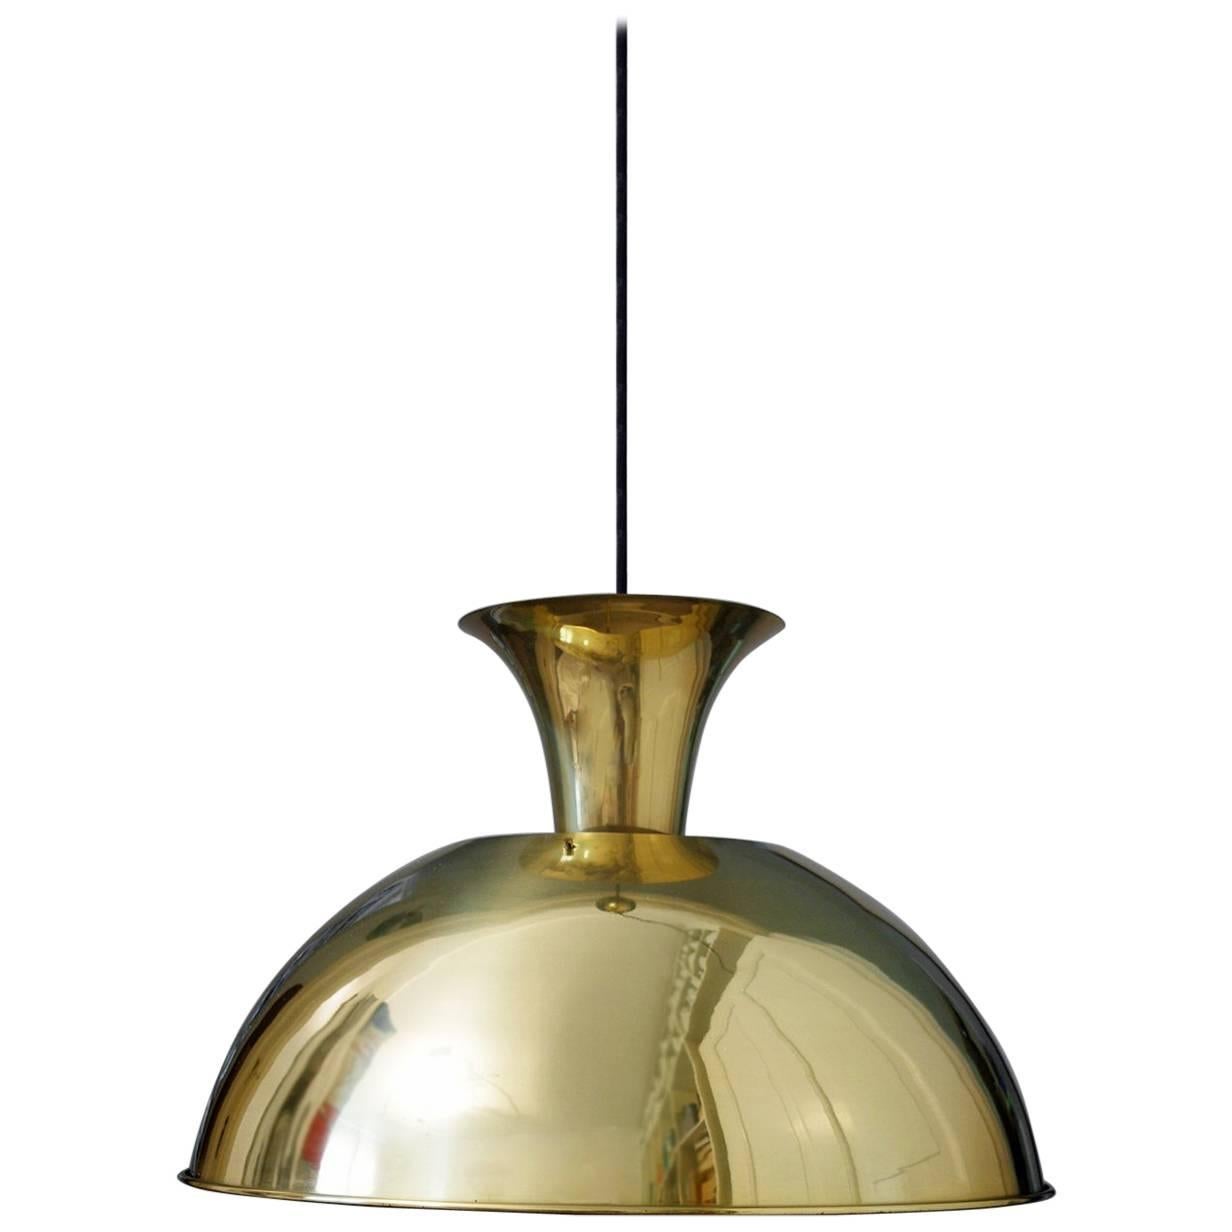 Wonderful large solid brass pendant light by Florian Schulz.
Germany, 1960s
Lamp sockets: One x E27 (E26)
Diameter: 20.1 in.
Height of the body: 13 in.
Cable length: upon request.


.